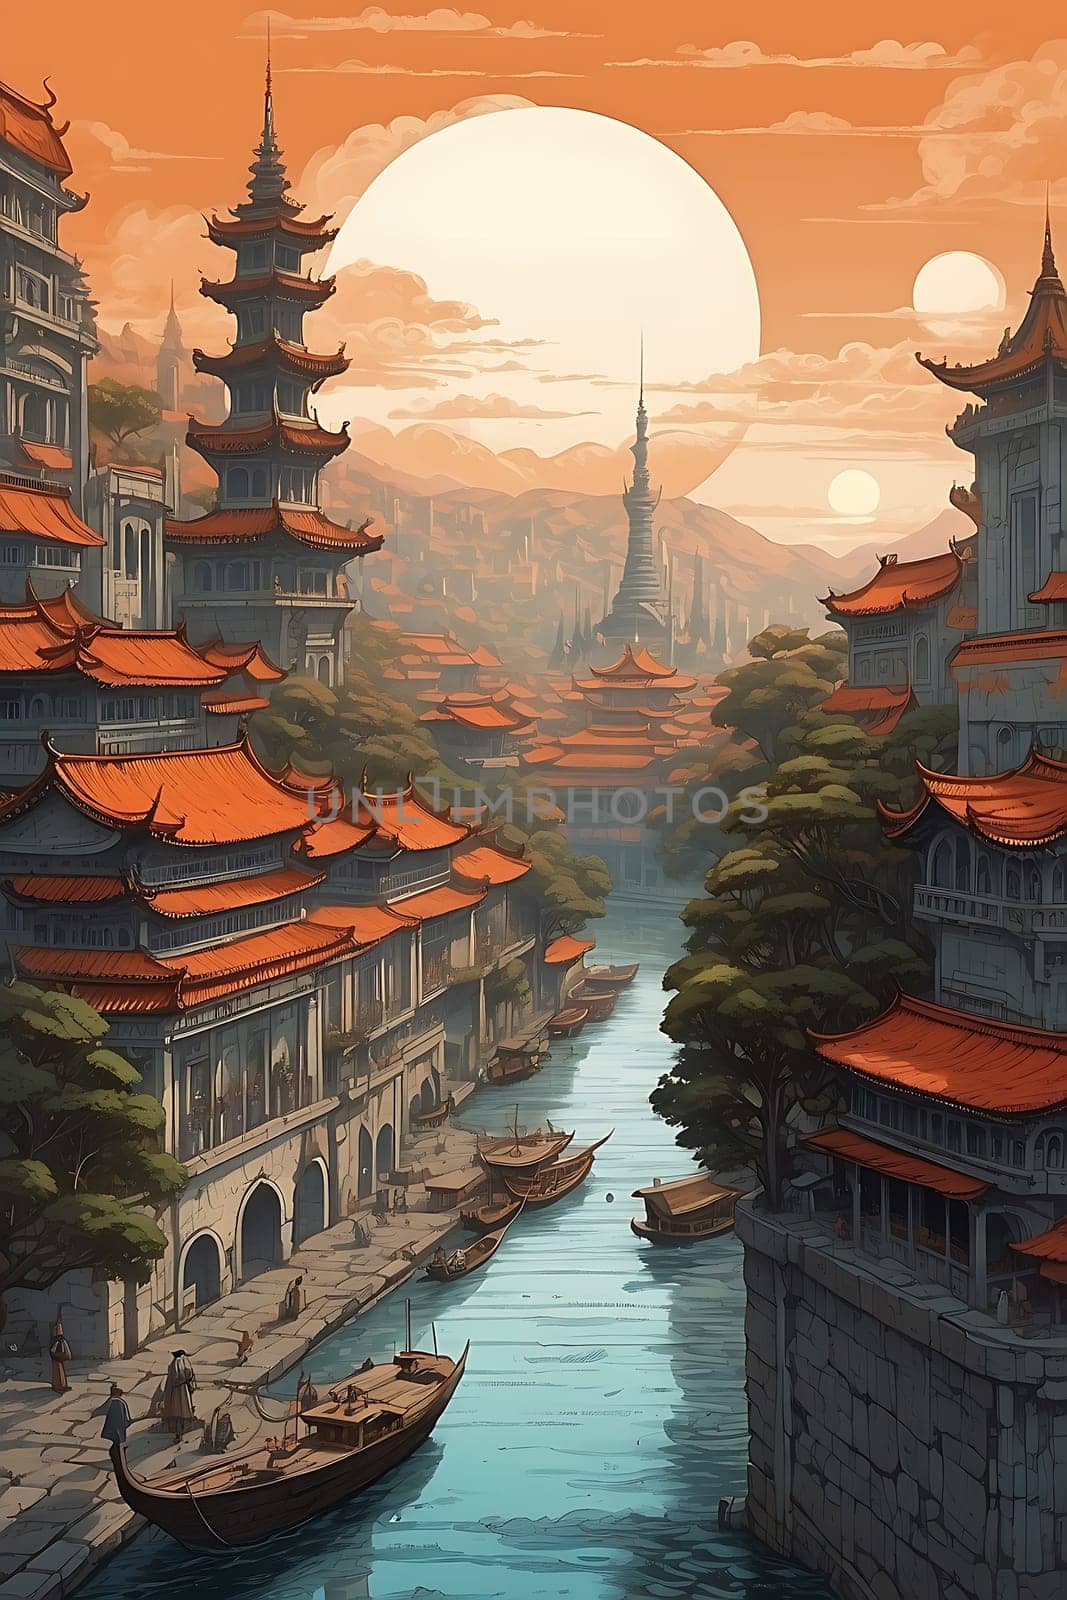 A vibrant painting capturing the beautiful scene of a river flowing through a bustling city.